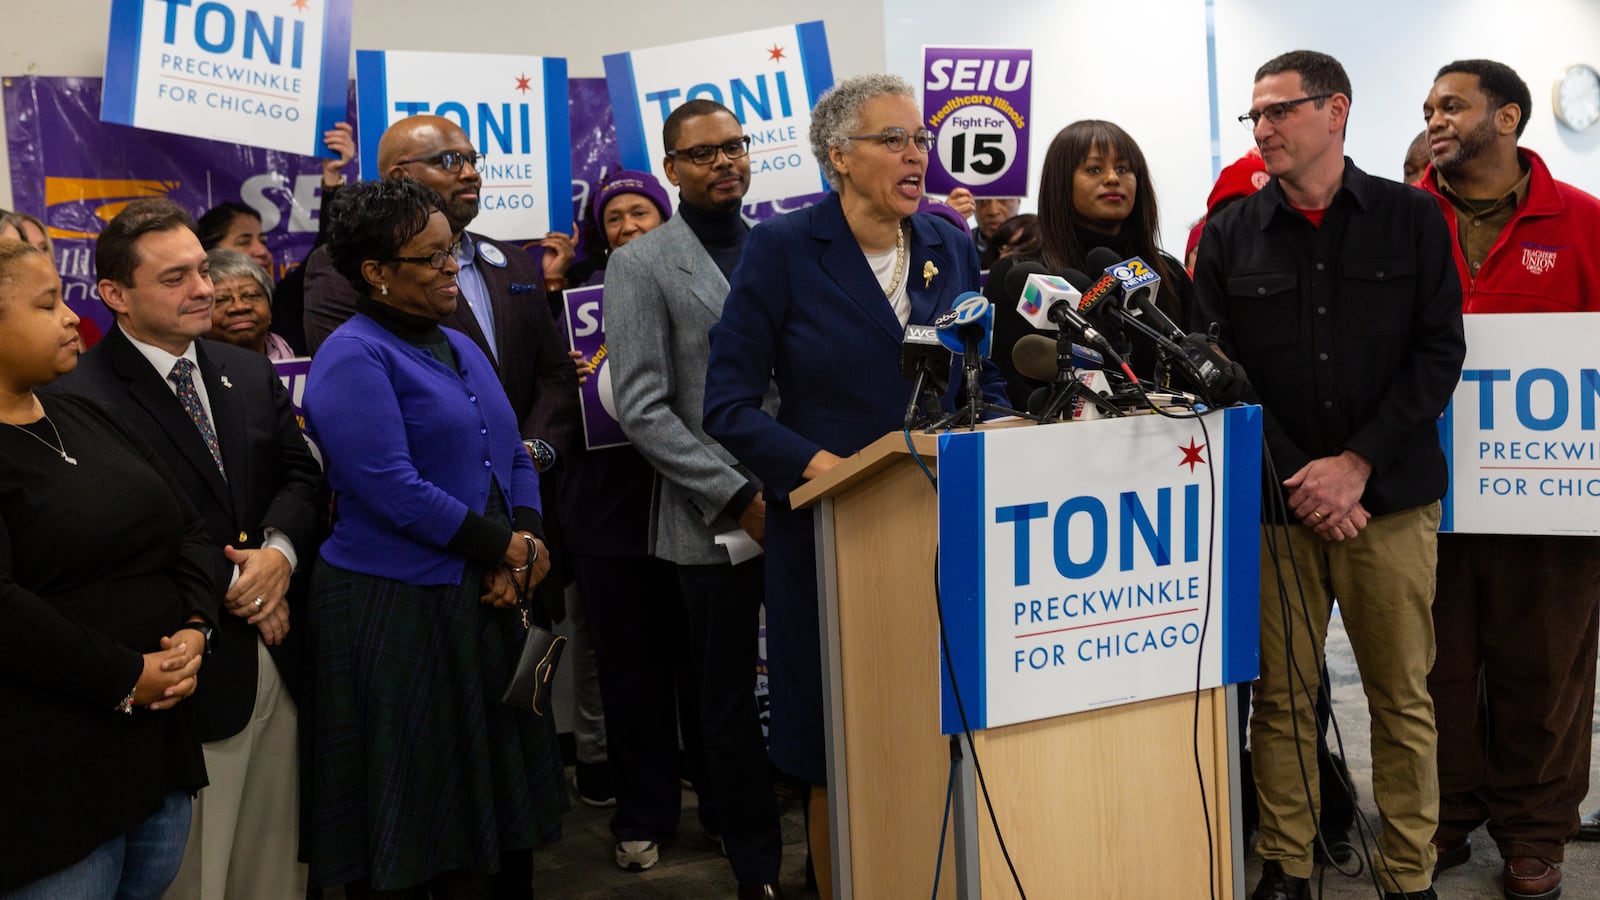 In December, Toni Preckwinkle recieved endorsements from three powerful progressive unions, including the Chicago Teachers Union, whose vice president Stacey Gates and president Jesse Sharkey are standing right of the podium.